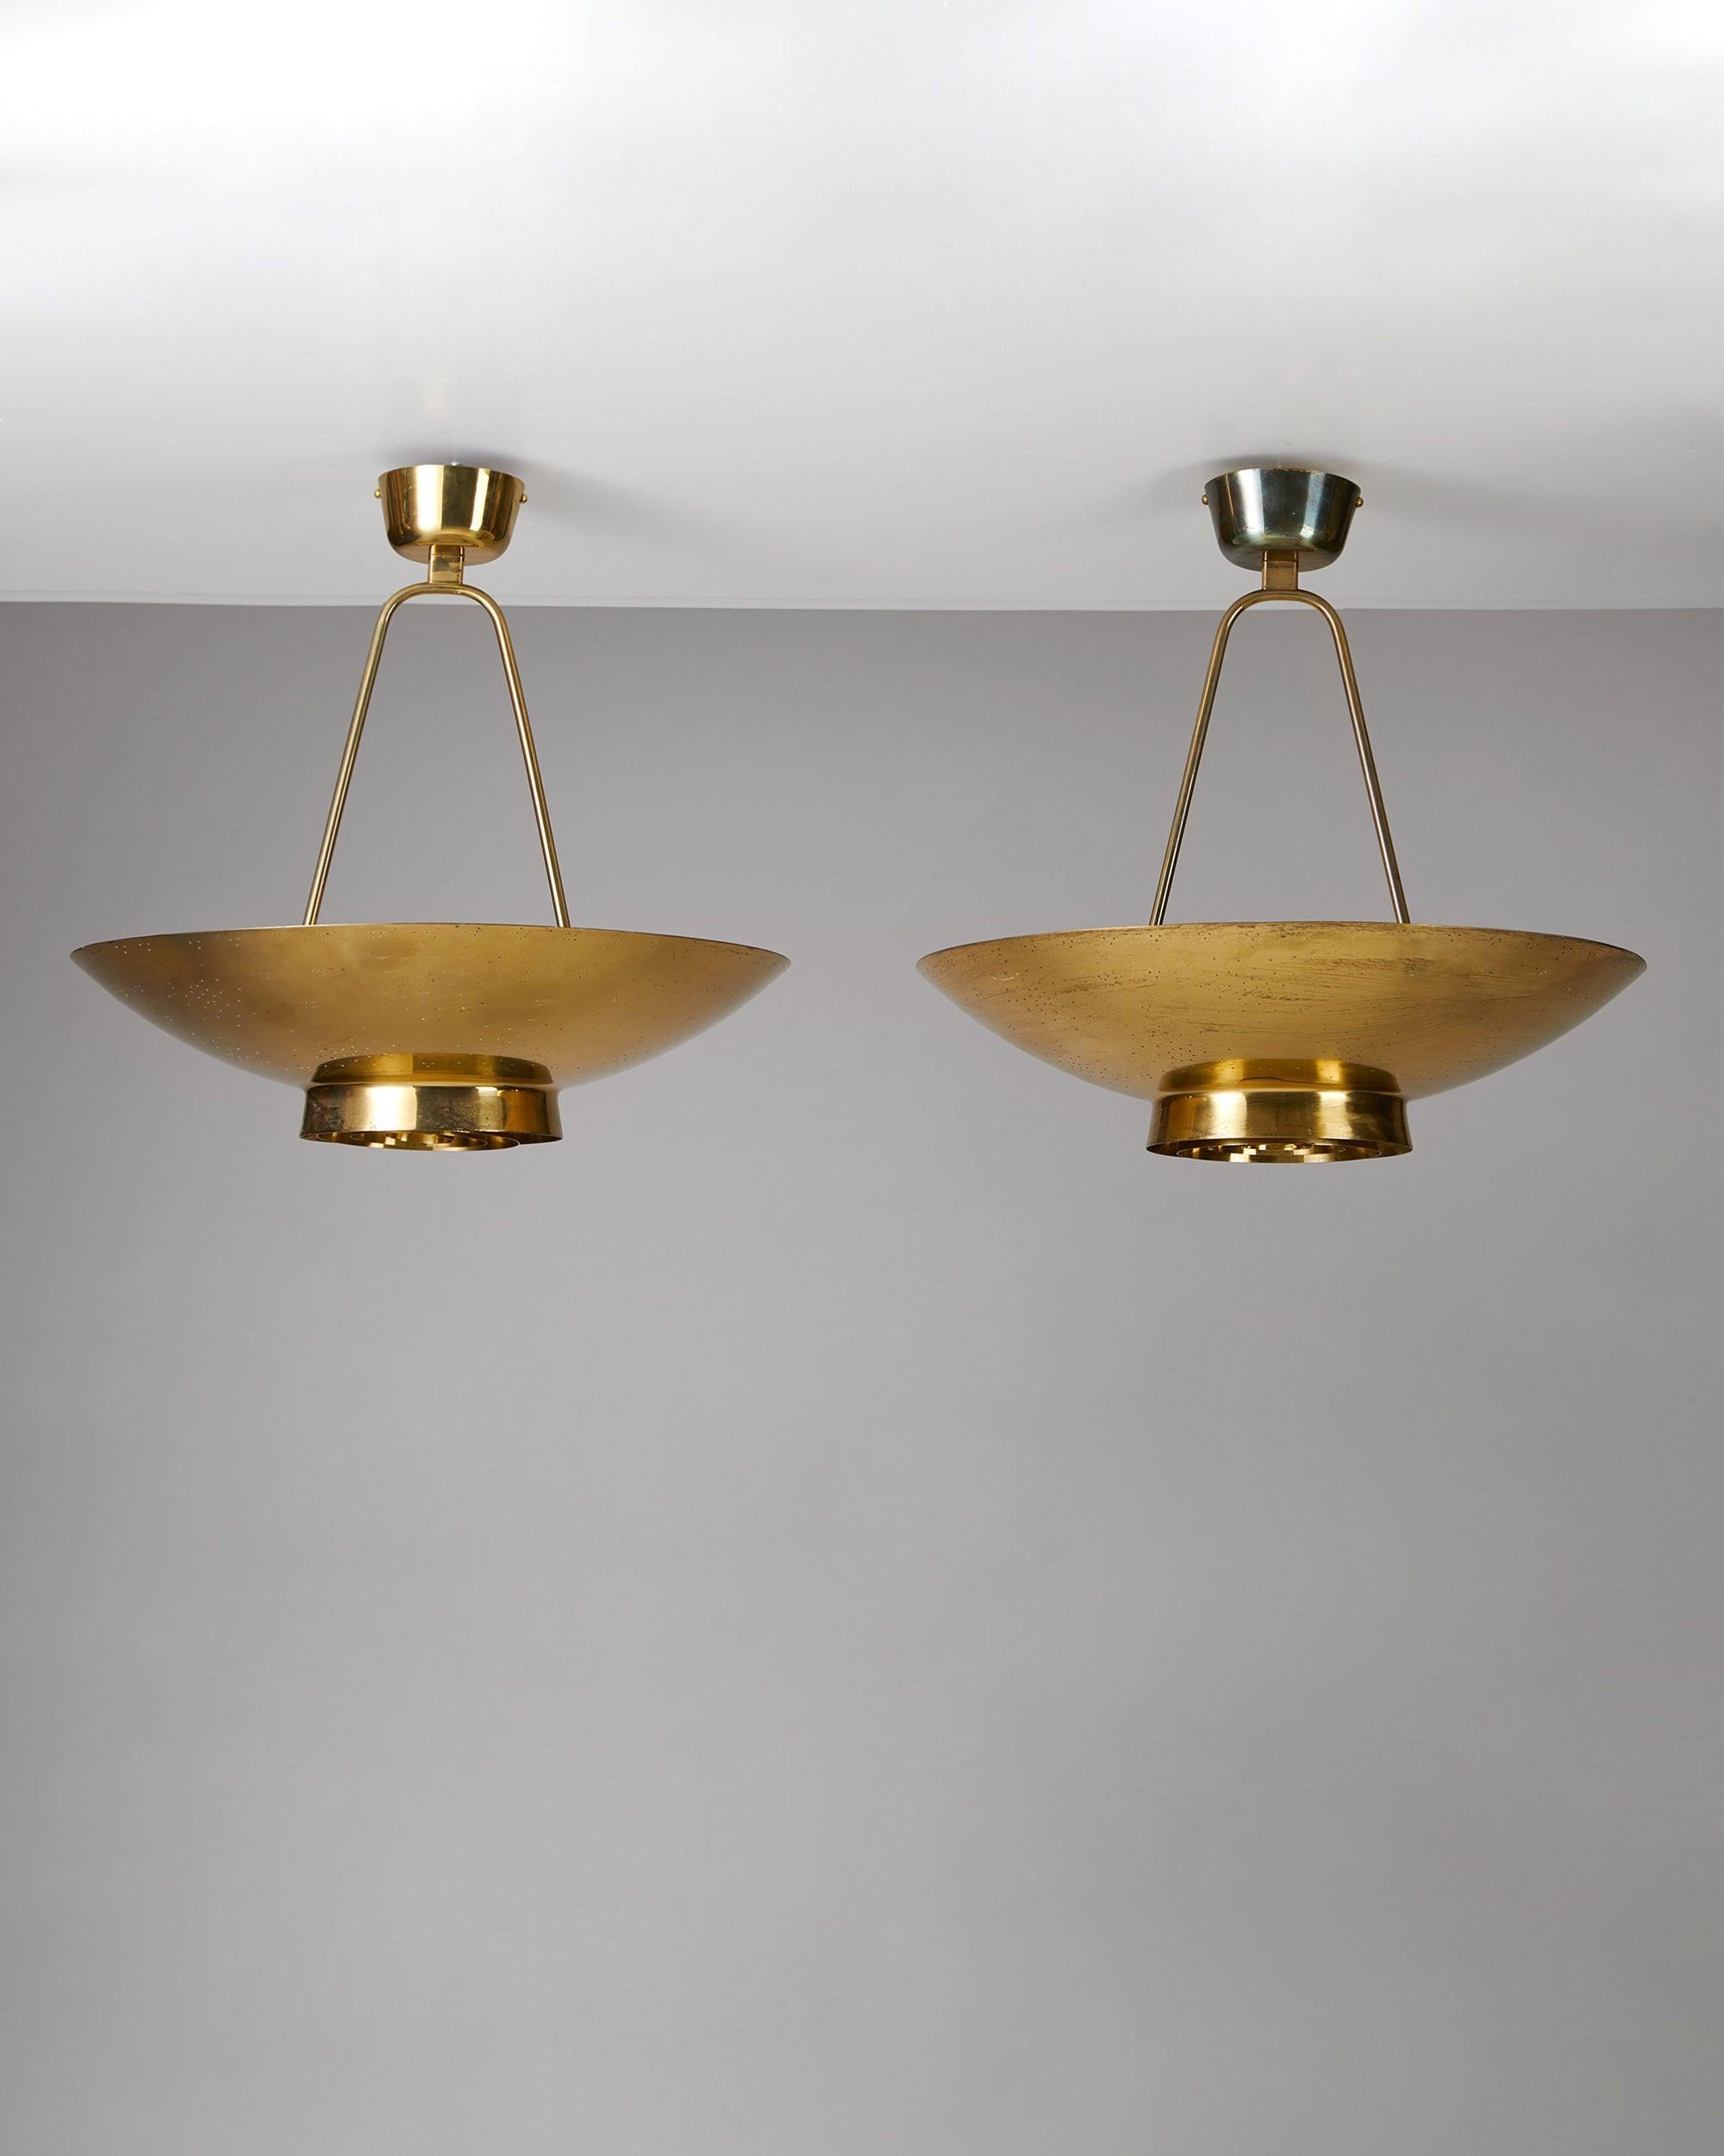 Pair of ceiling lamps model 9060 designed by Paavo Tynell for Taito Oy, Finland, 1950s.
Brass.

This model was designed for the secretariat's room at the United Nations, NYC, USA.

Measures: H 53 cm/ 20 7/8